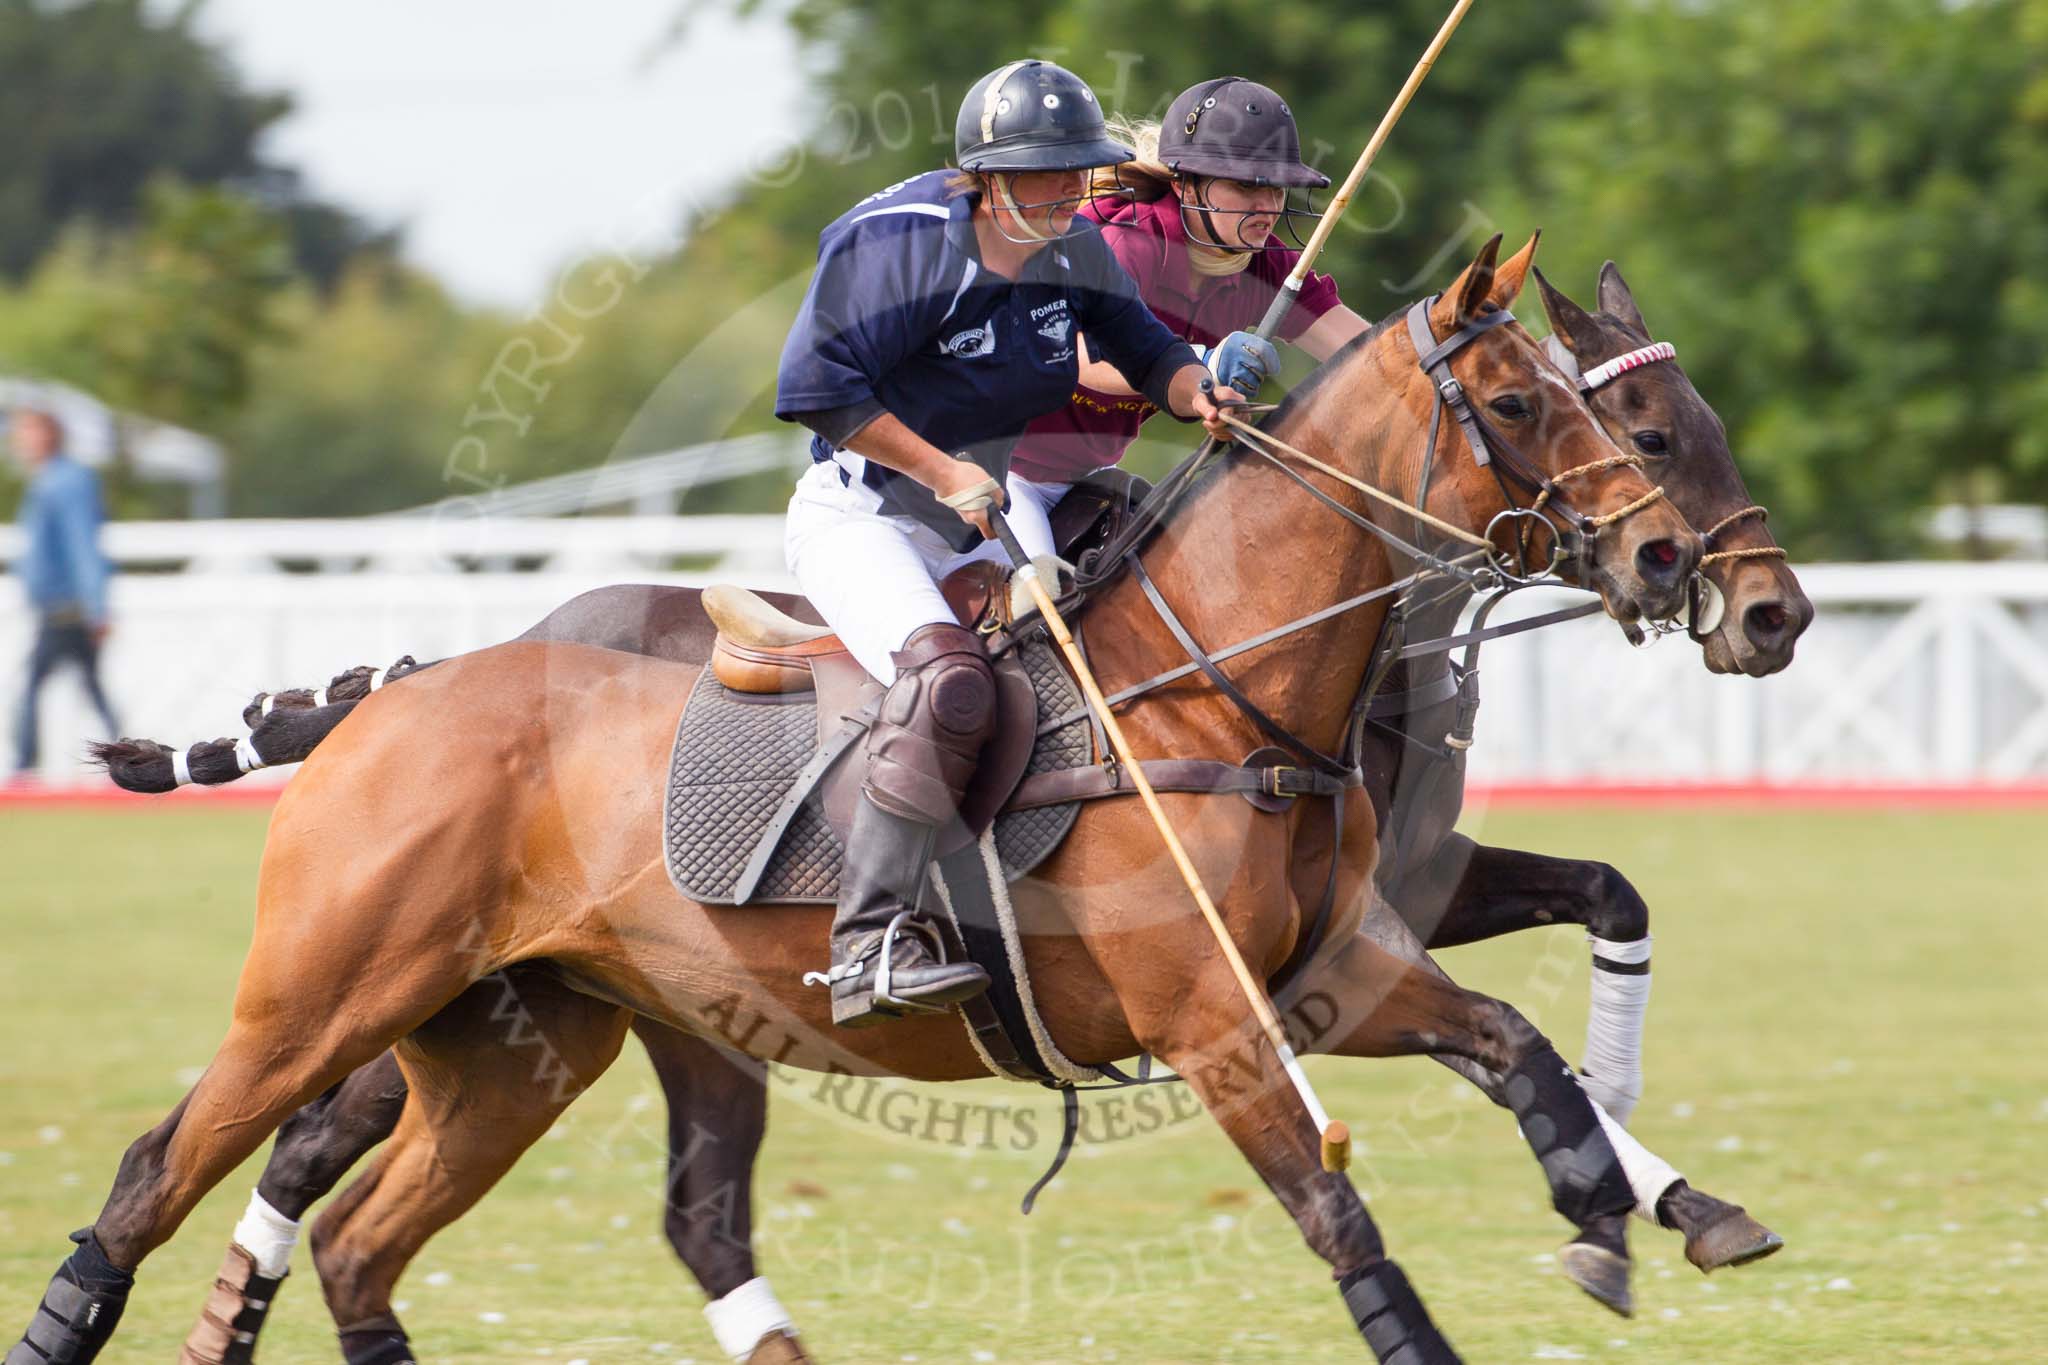 DBPC Polo in the Park 2013, Final of the Amaranther Trophy (0 Goal), Bucking Broncos vs The Inn Team.
Dallas Burston Polo Club, ,
Southam,
Warwickshire,
United Kingdom,
on 01 September 2013 at 12:07, image #155